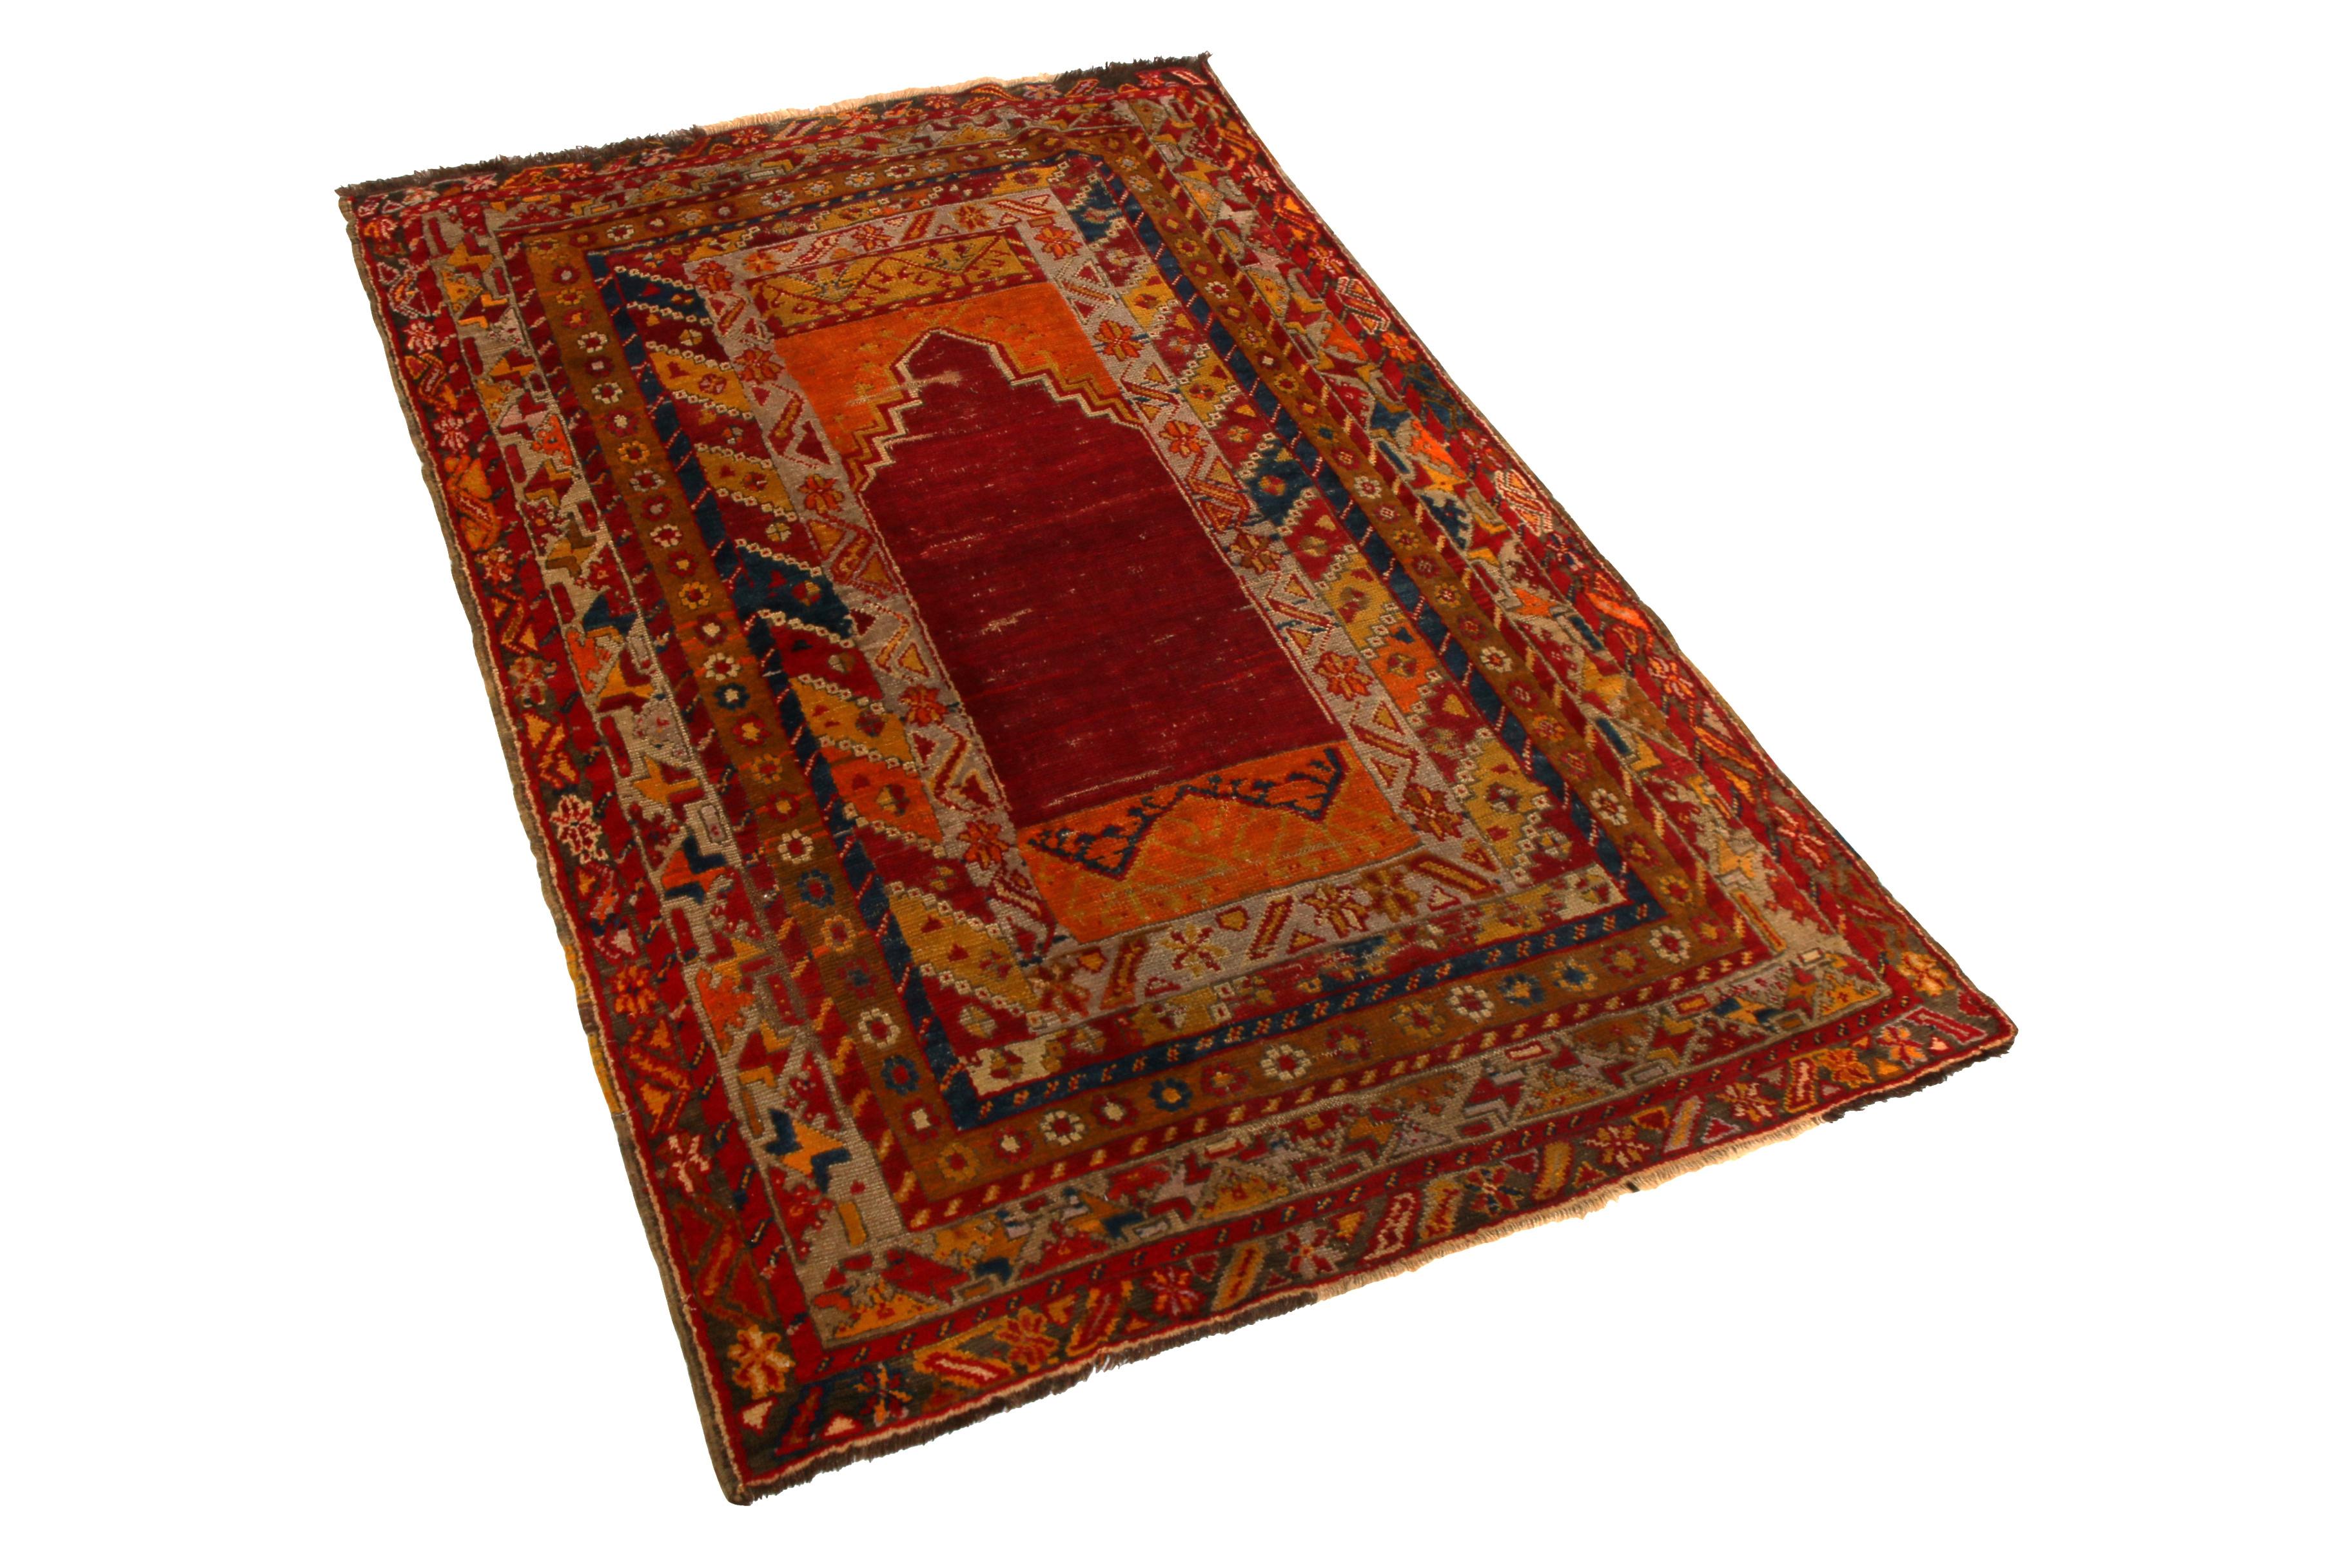 Hand knotted in wool originating from Persia between 1950-1960, this vintage midcentury Kirsehir rug enjoys one of the more distinct approaches to the venerated Mihrab pattern we’ve seen in our antique and vintage collections, both in the unique